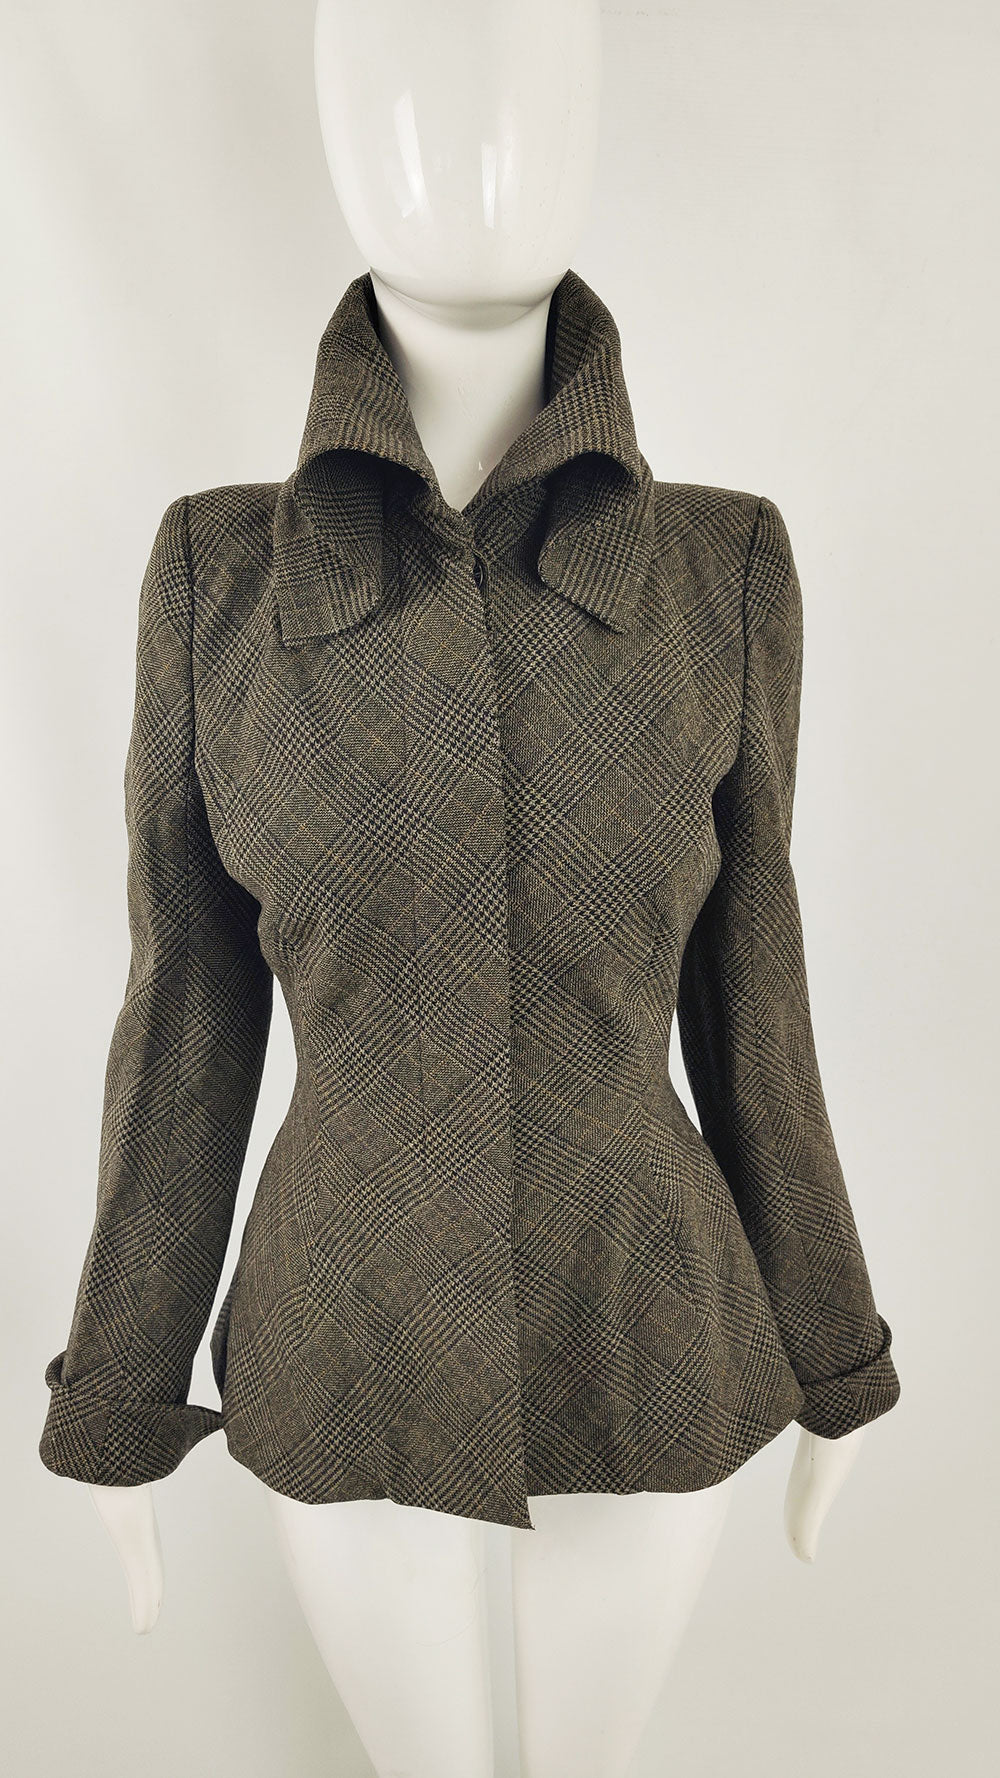 An architectural wool and silk blend hourglass jacket from Mariot Chanet's Autumn Winter 1995 / 96 collection.